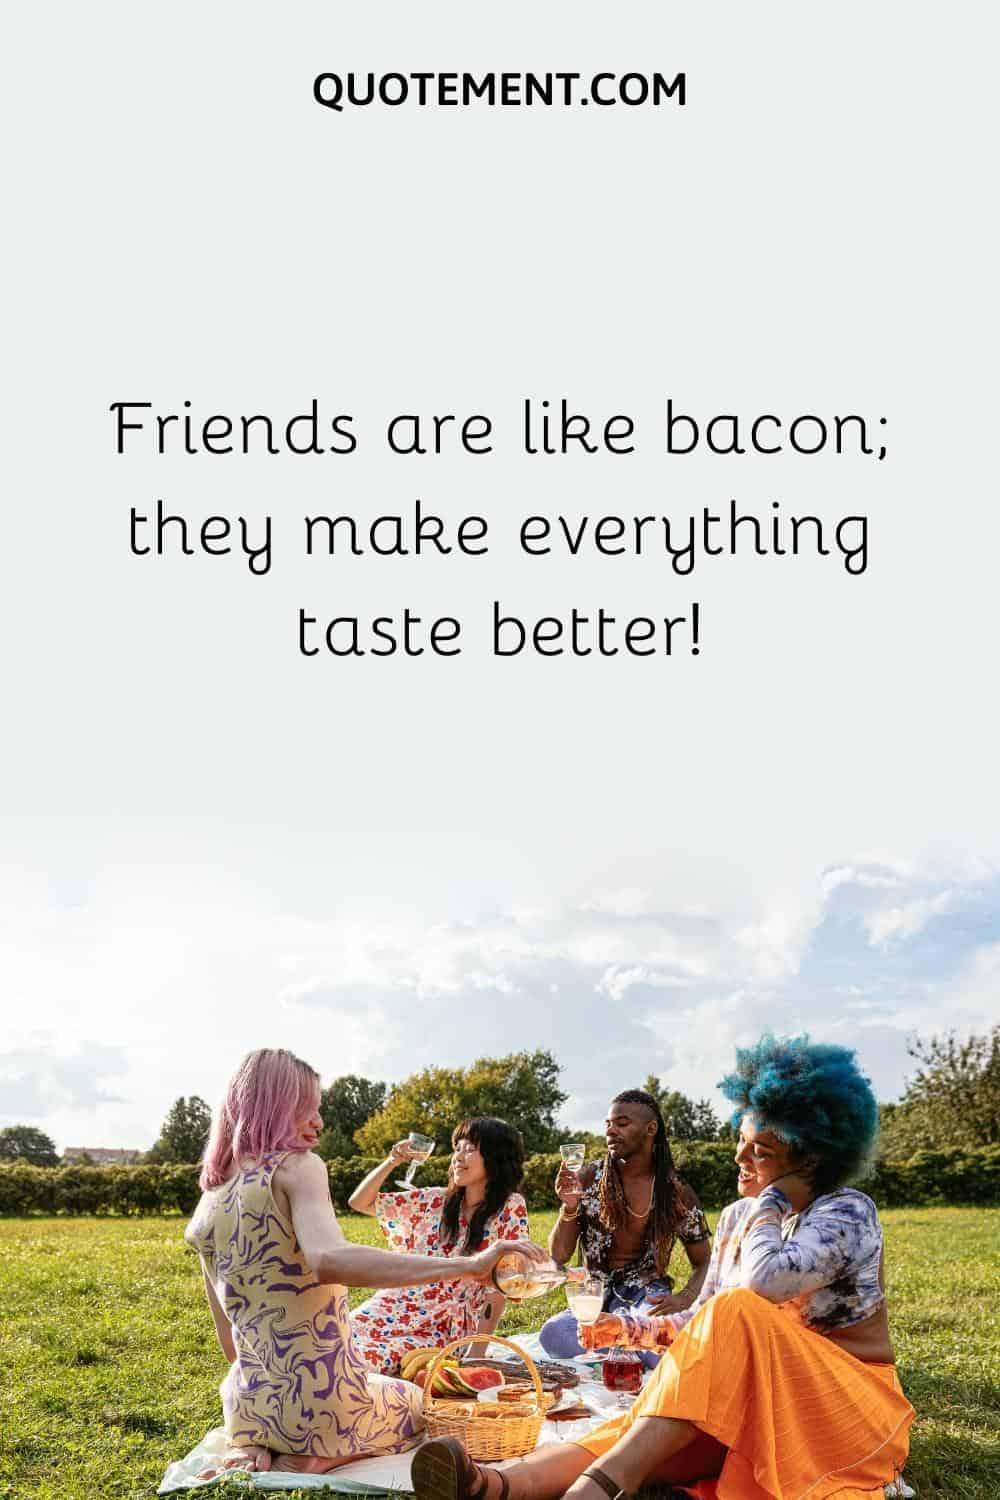 Friends are like bacon; they make everything taste better!